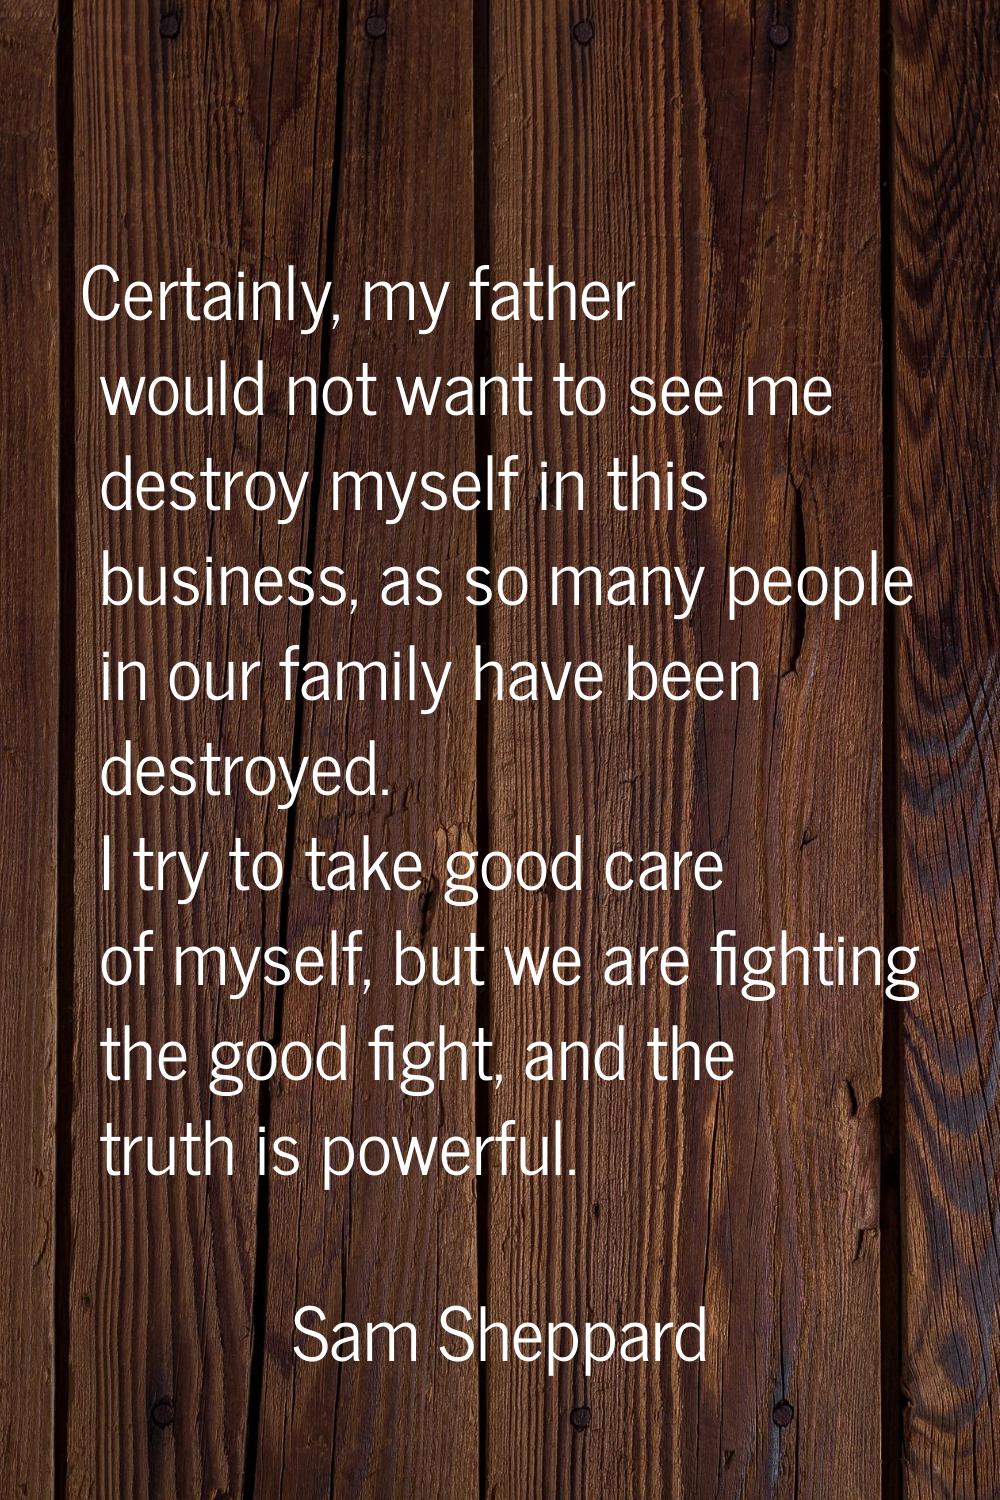 Certainly, my father would not want to see me destroy myself in this business, as so many people in